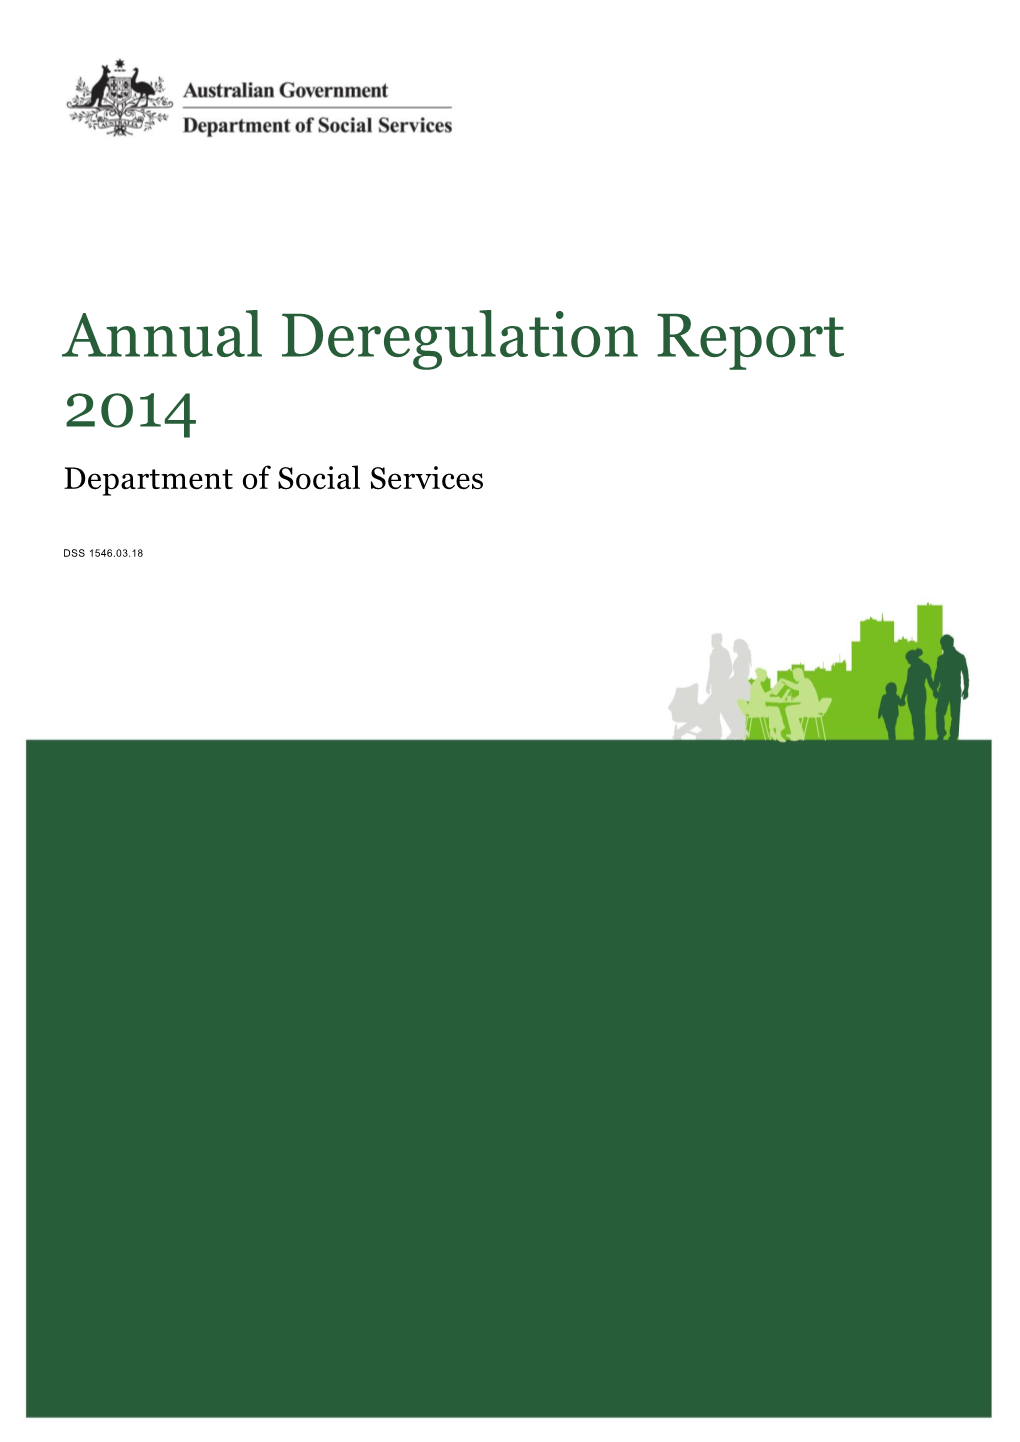 Annual Deregulation Report 2014 Department of Social Services